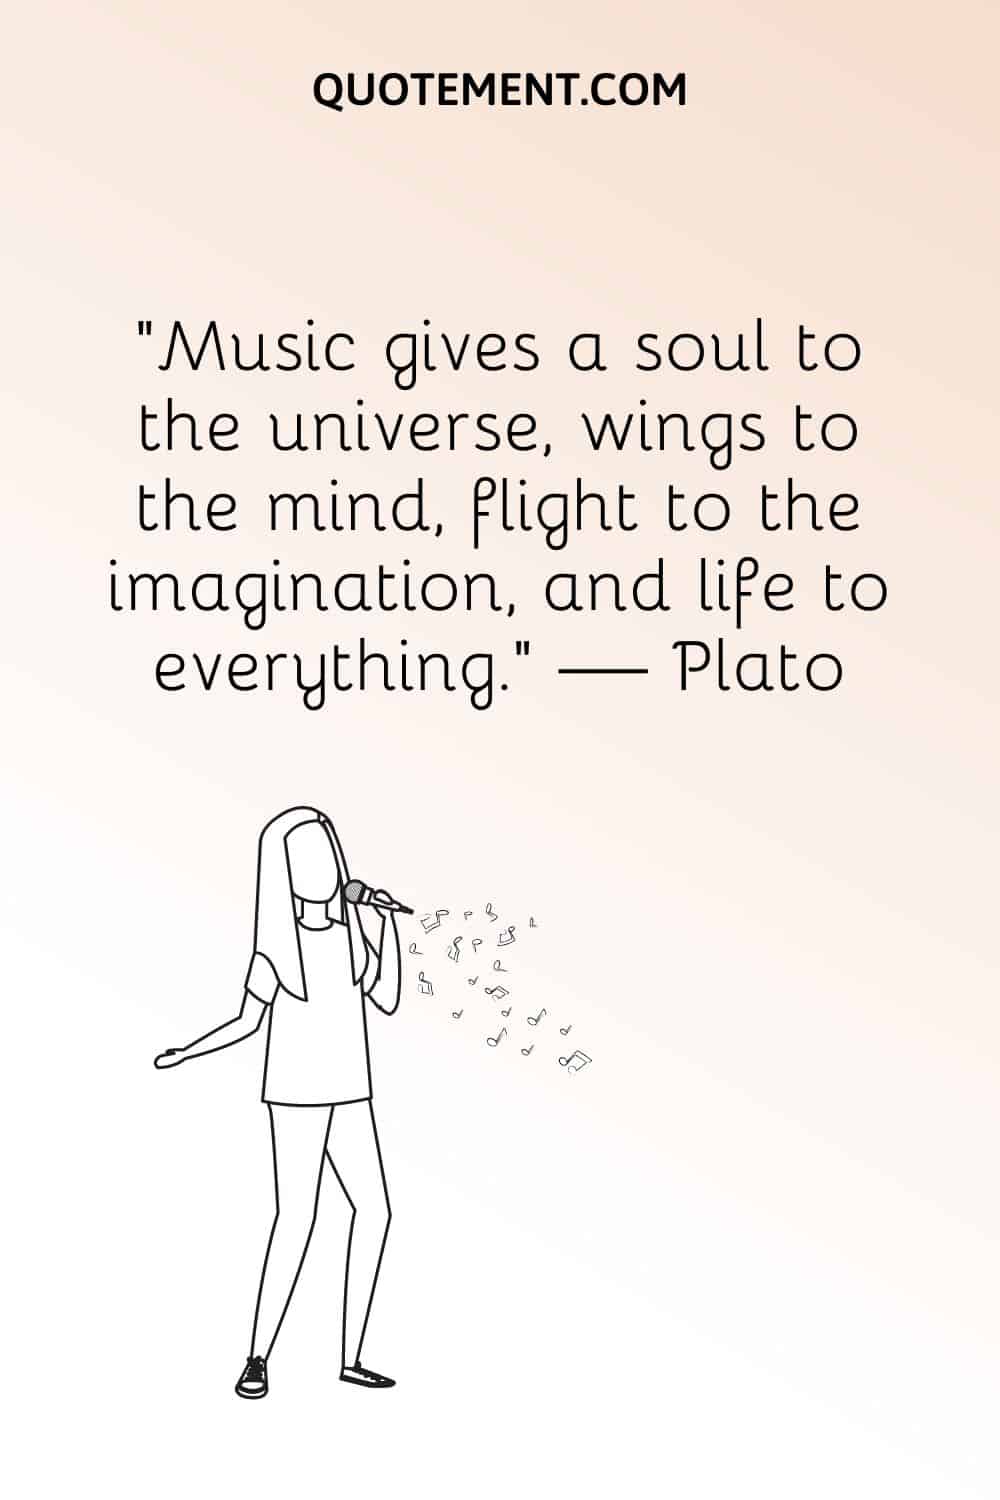 “Music gives a soul to the universe, wings to the mind, flight to the imagination, and life to everything.” — Plato